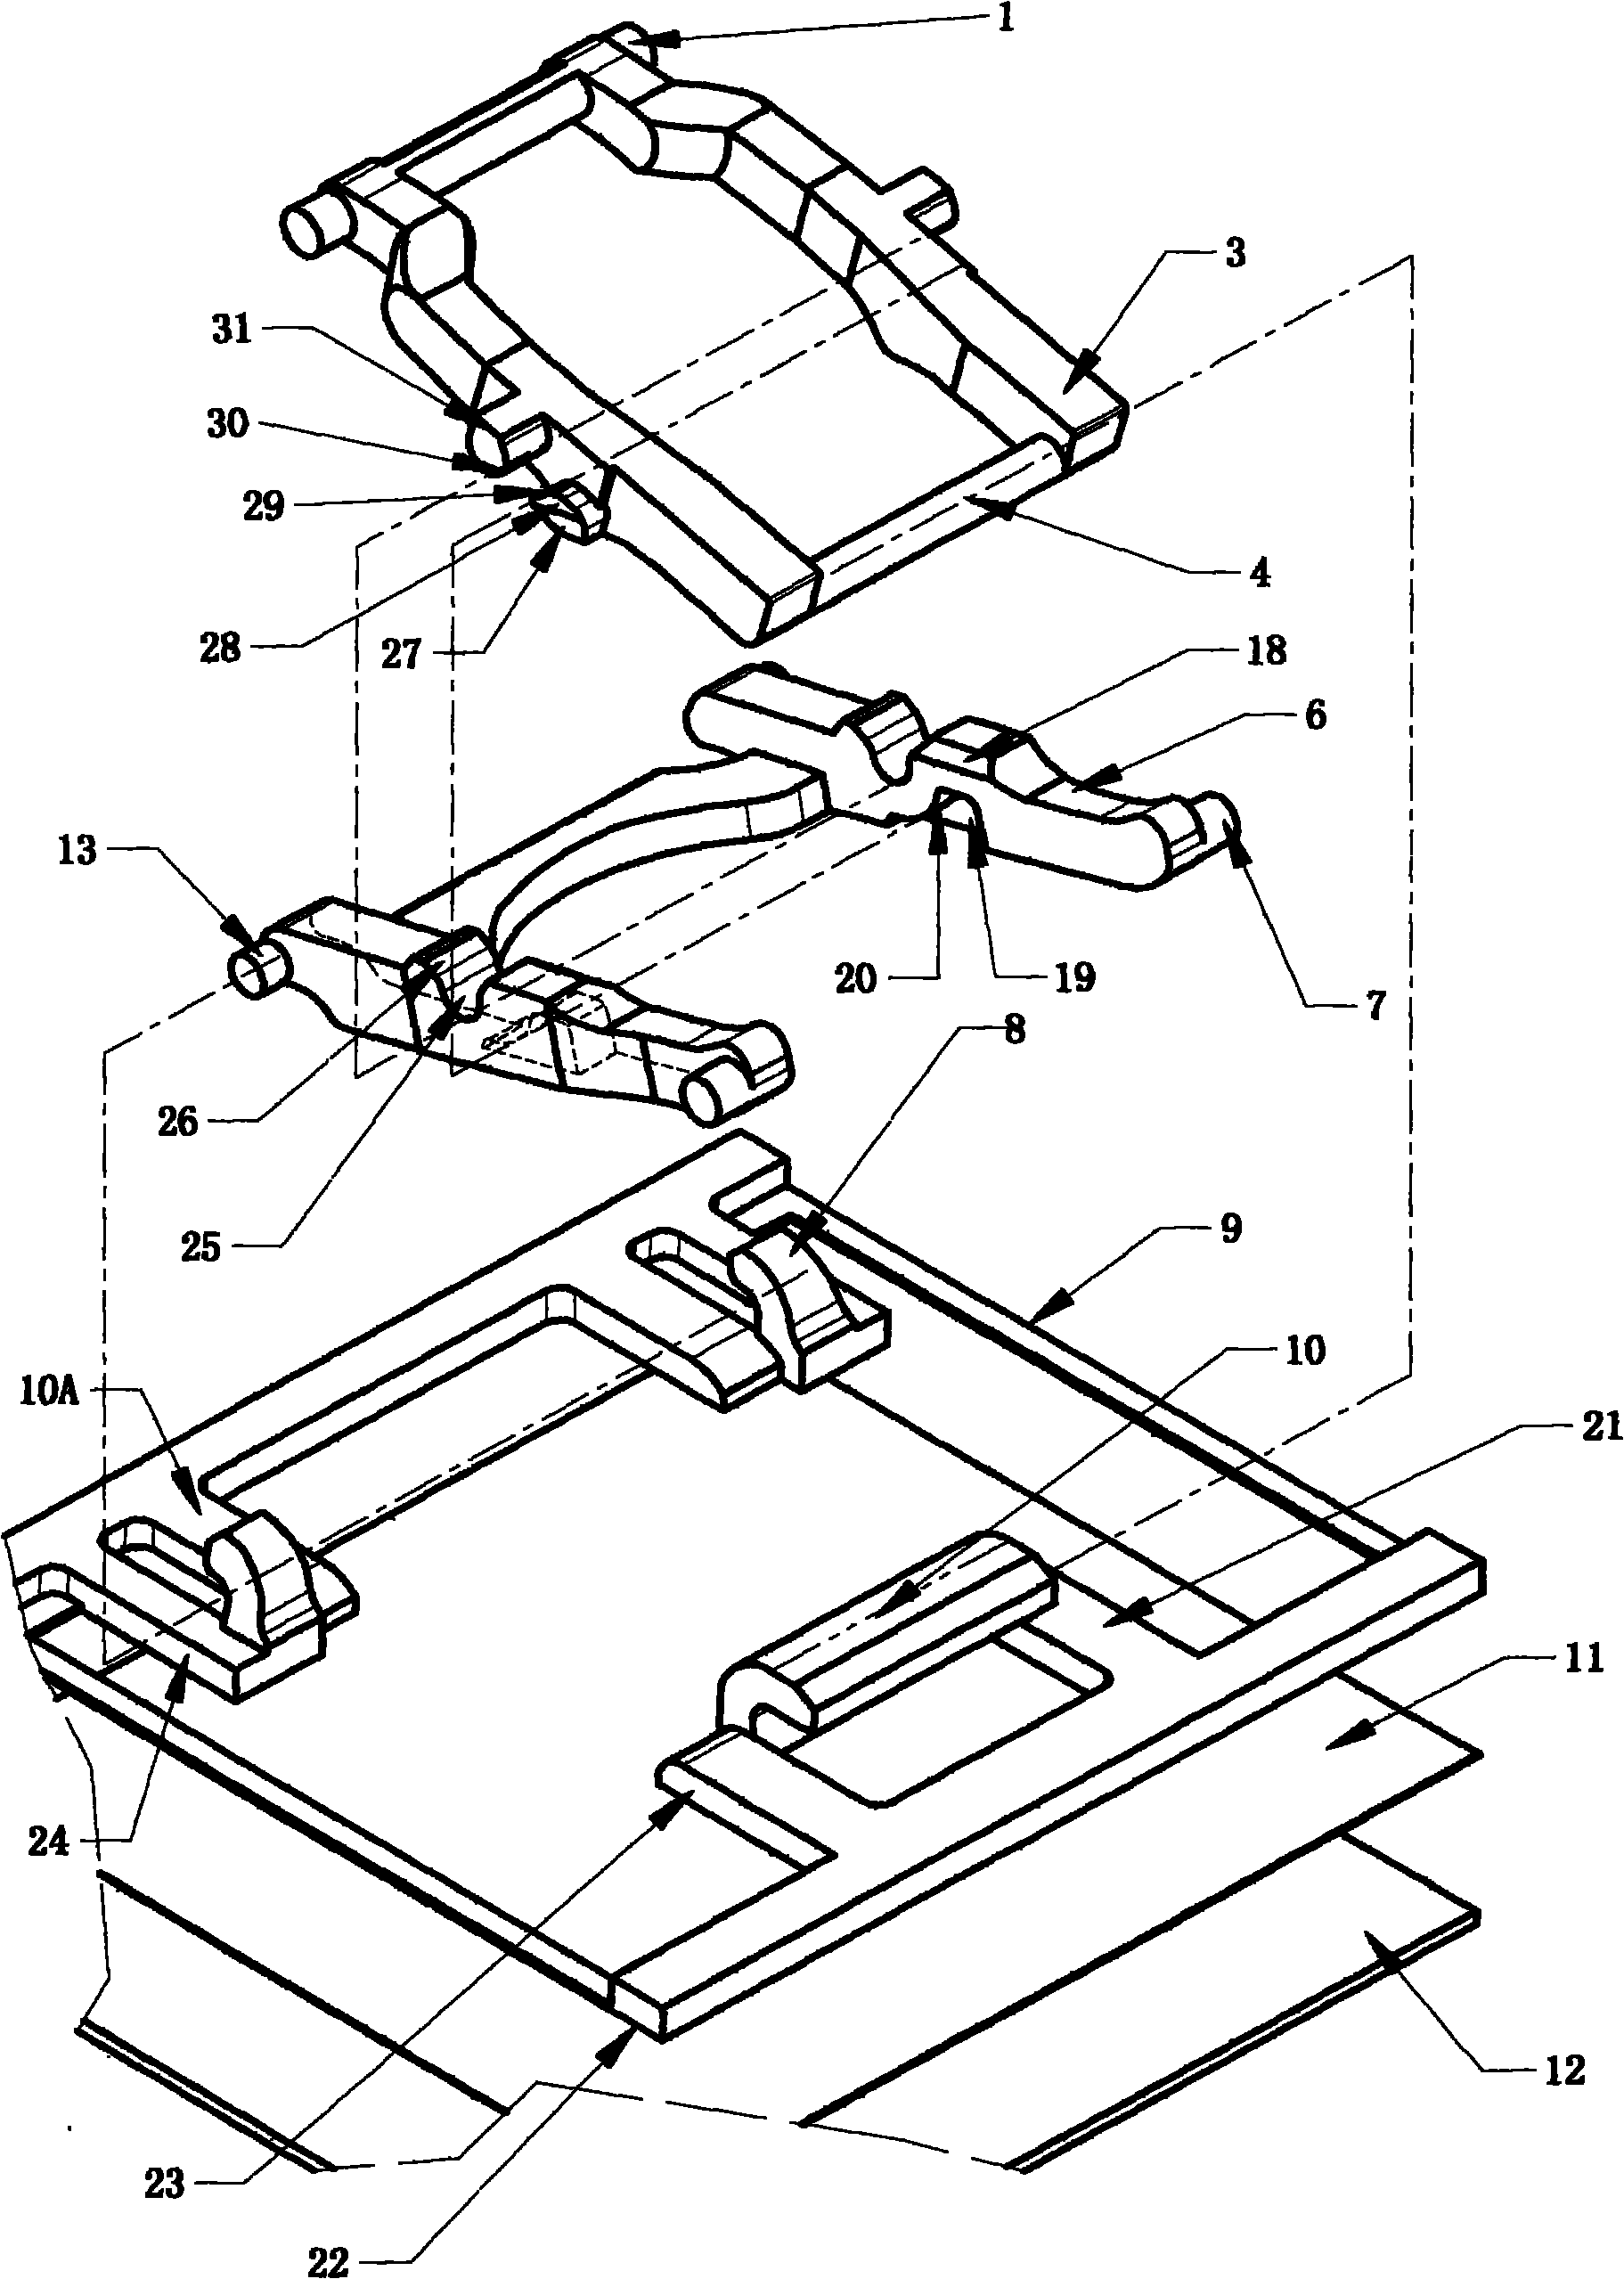 X-shaped support structure device